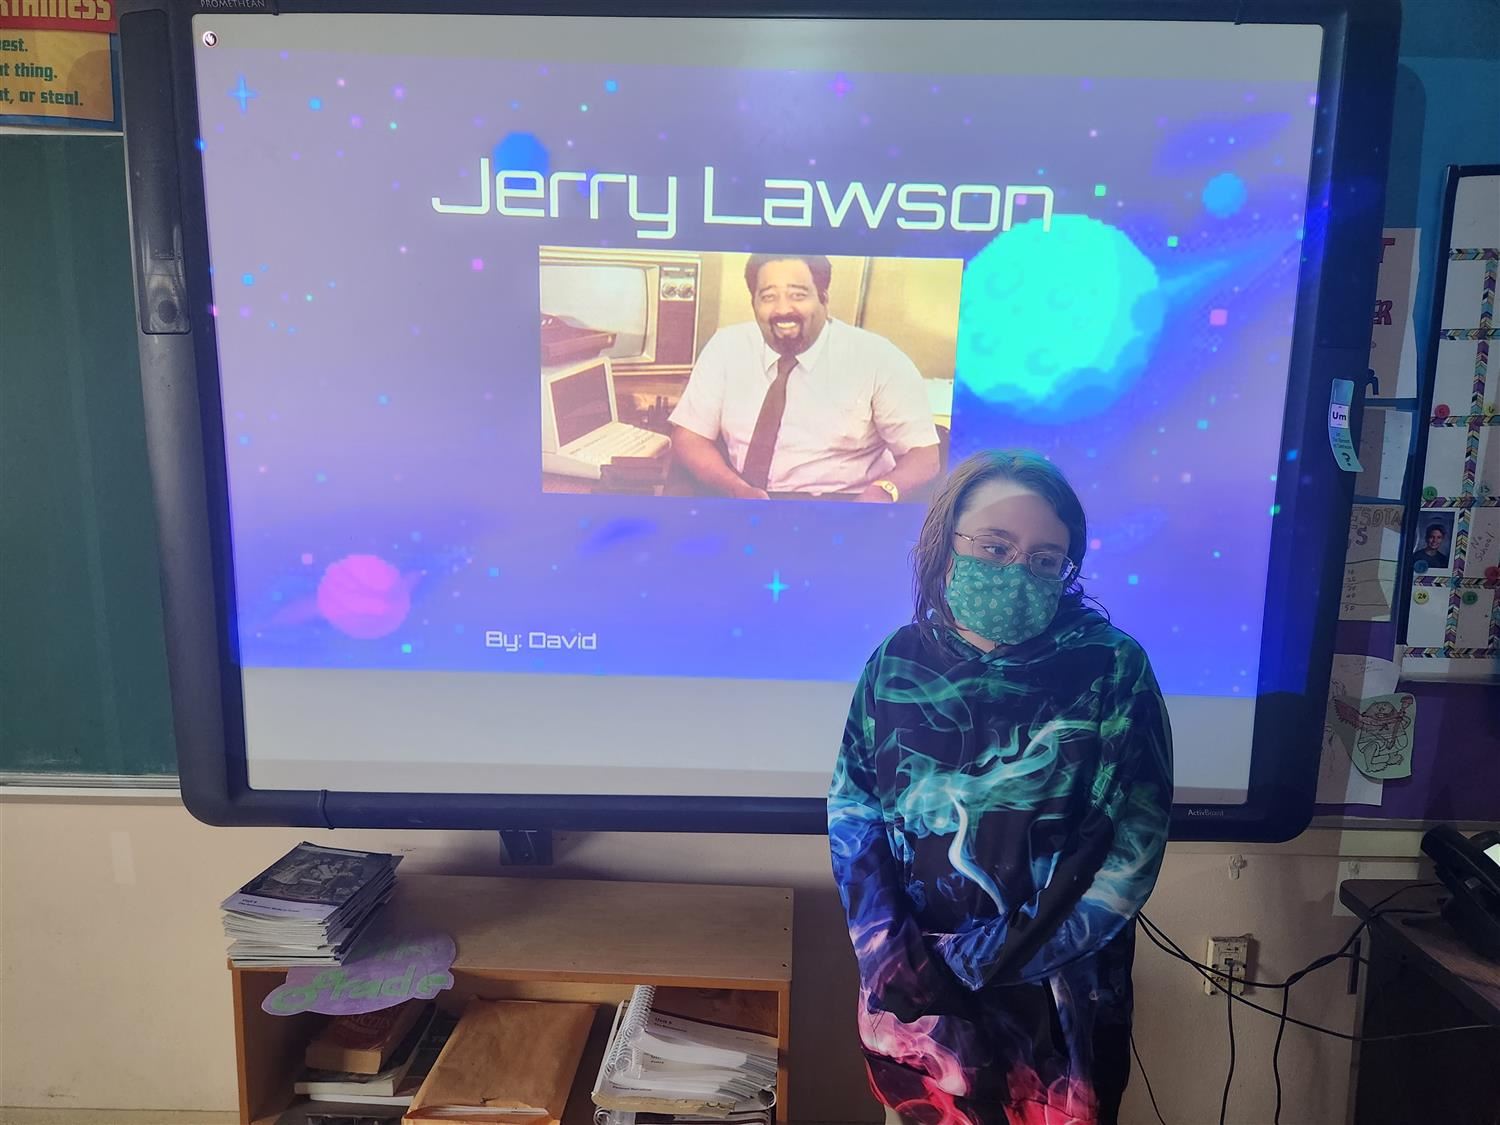 Student standing in front of a projector with a slide on it introducing Jerry Lawson.